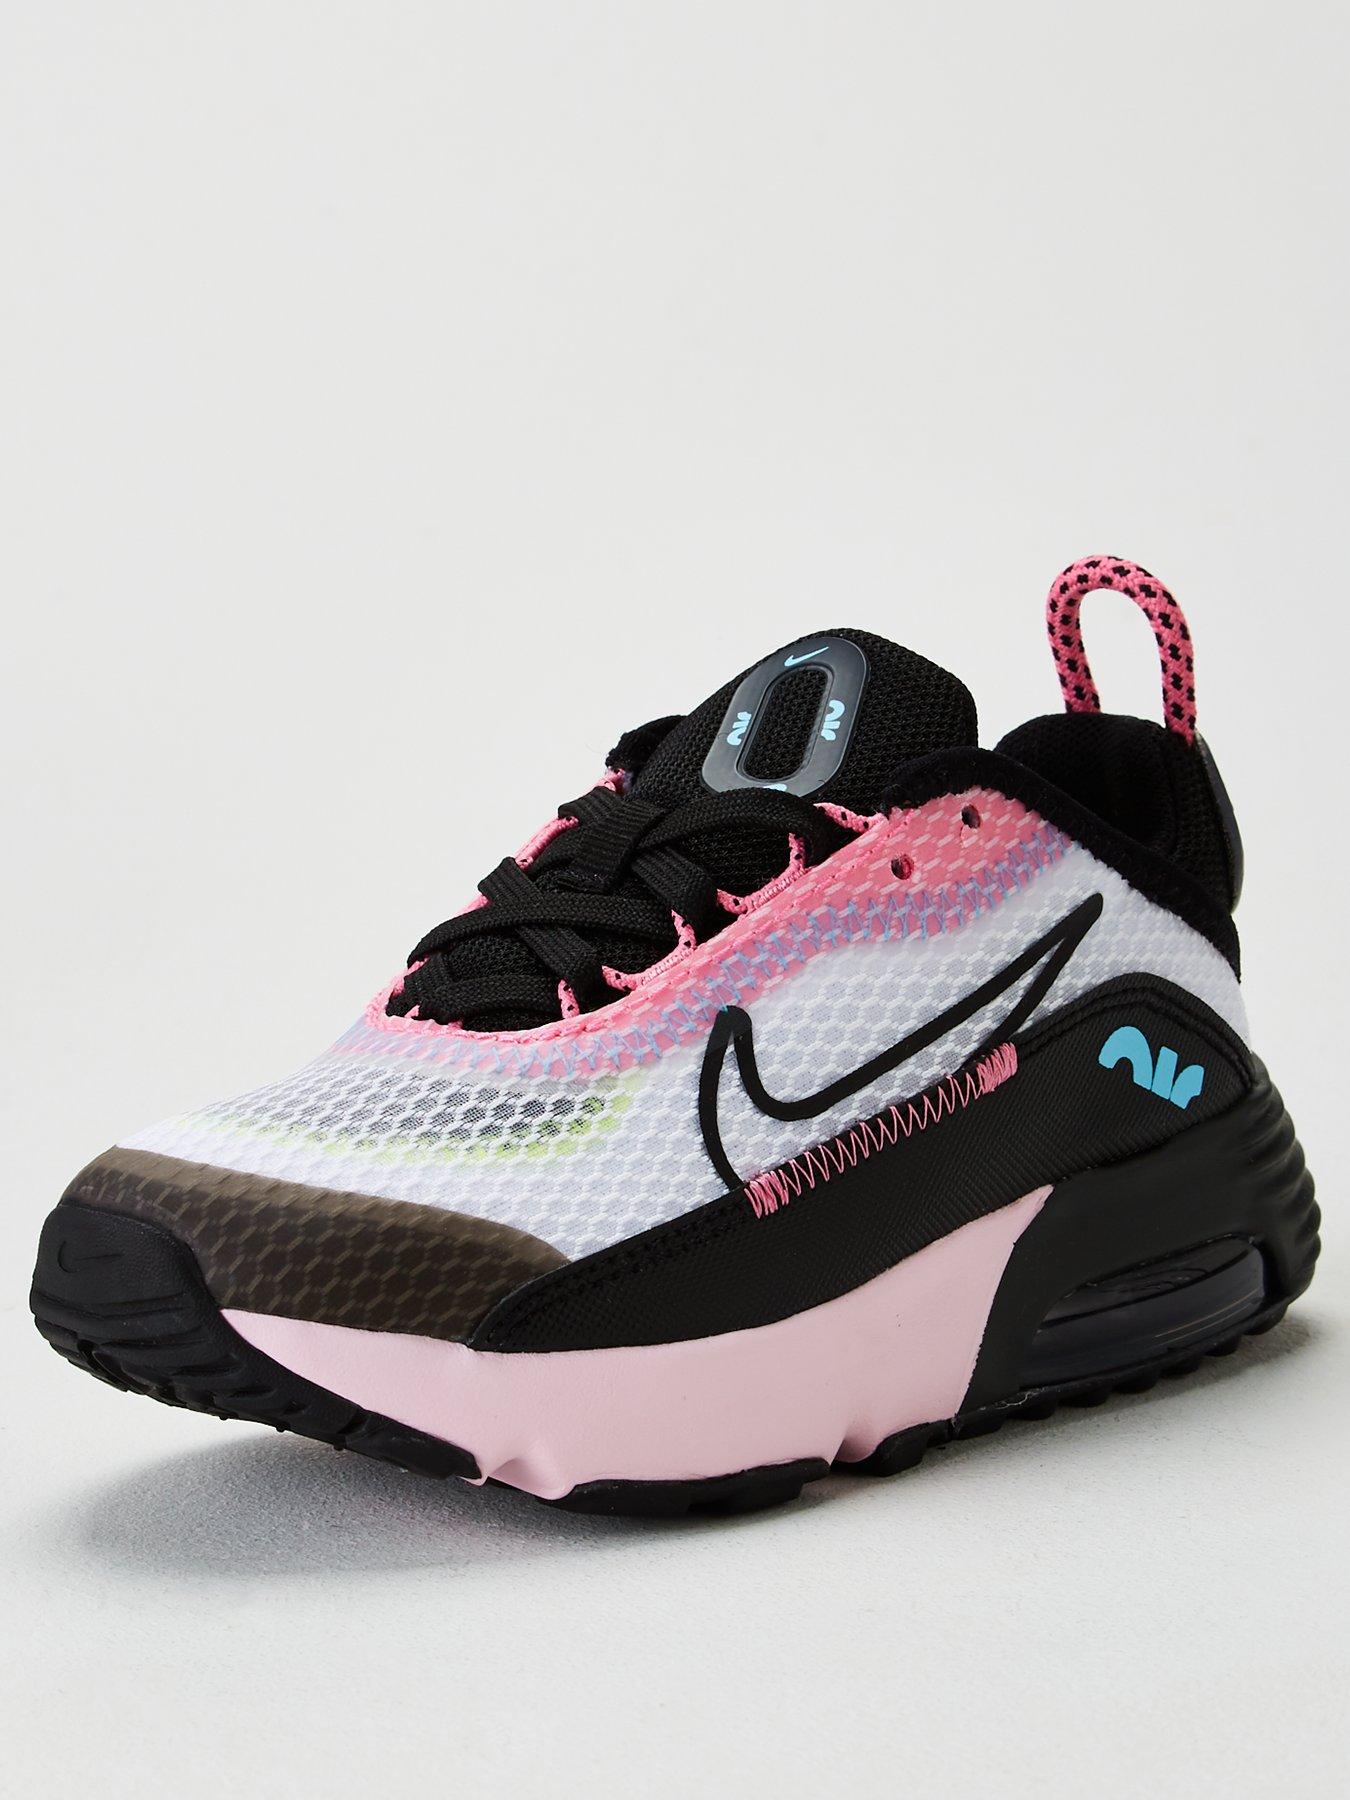 Boys Nike Trainers | Nike Trainers for 